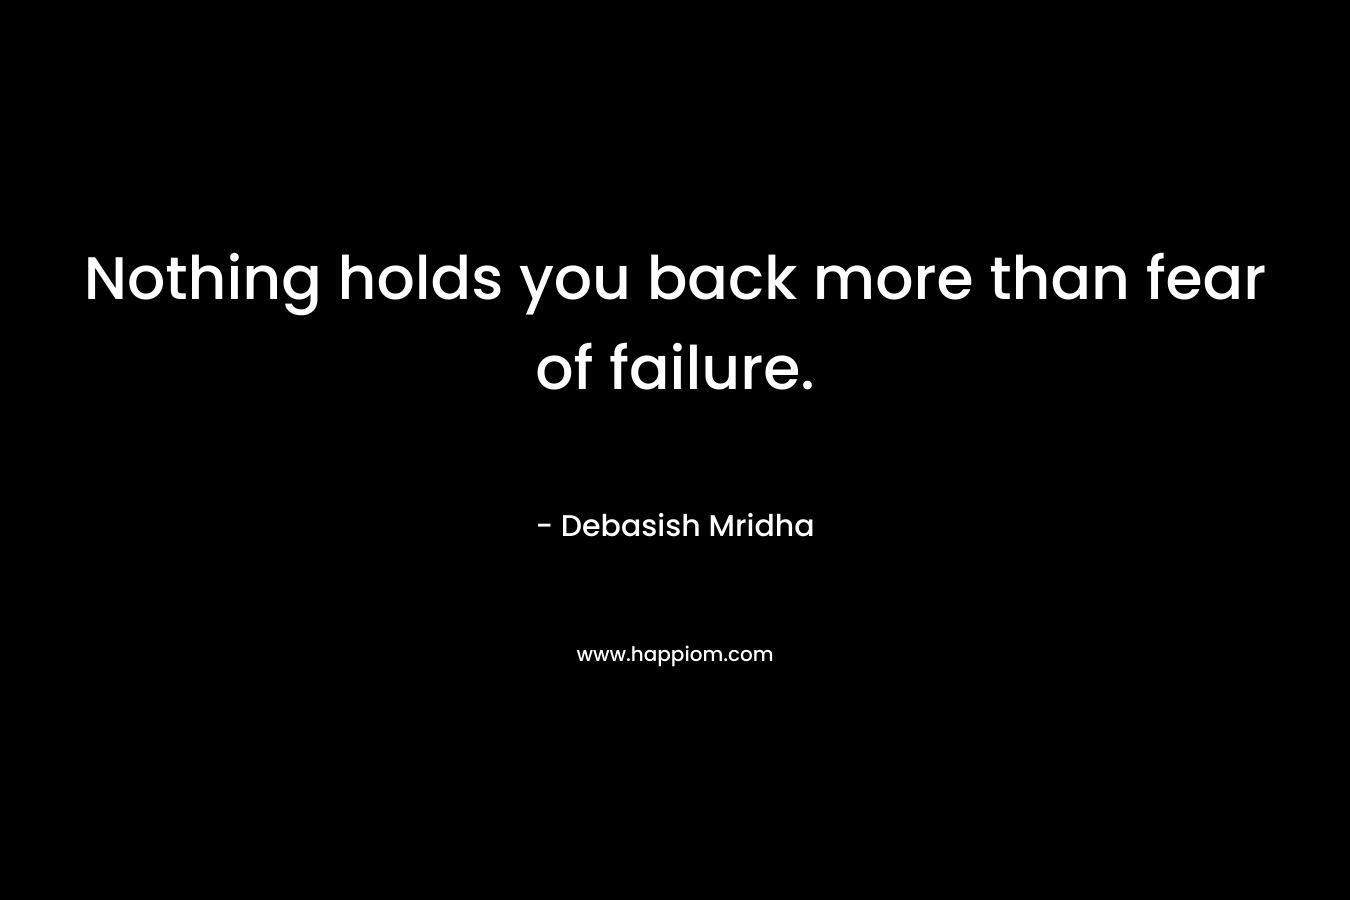 Nothing holds you back more than fear of failure.